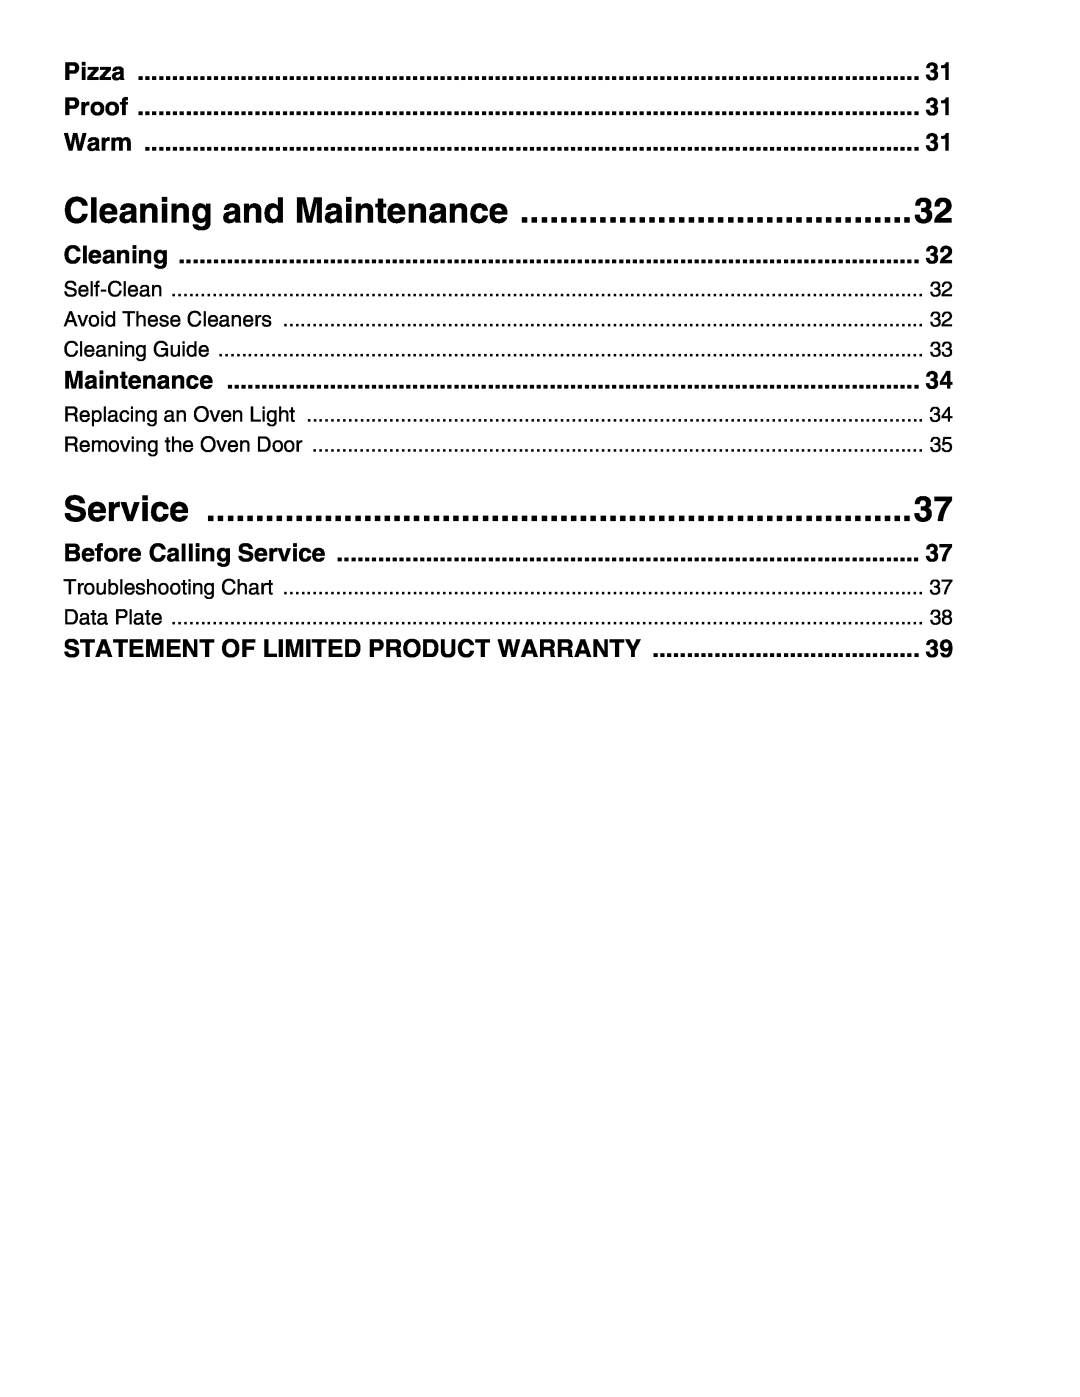 Thermador M271E, M301E manual Cleaning and Maintenance, Service 